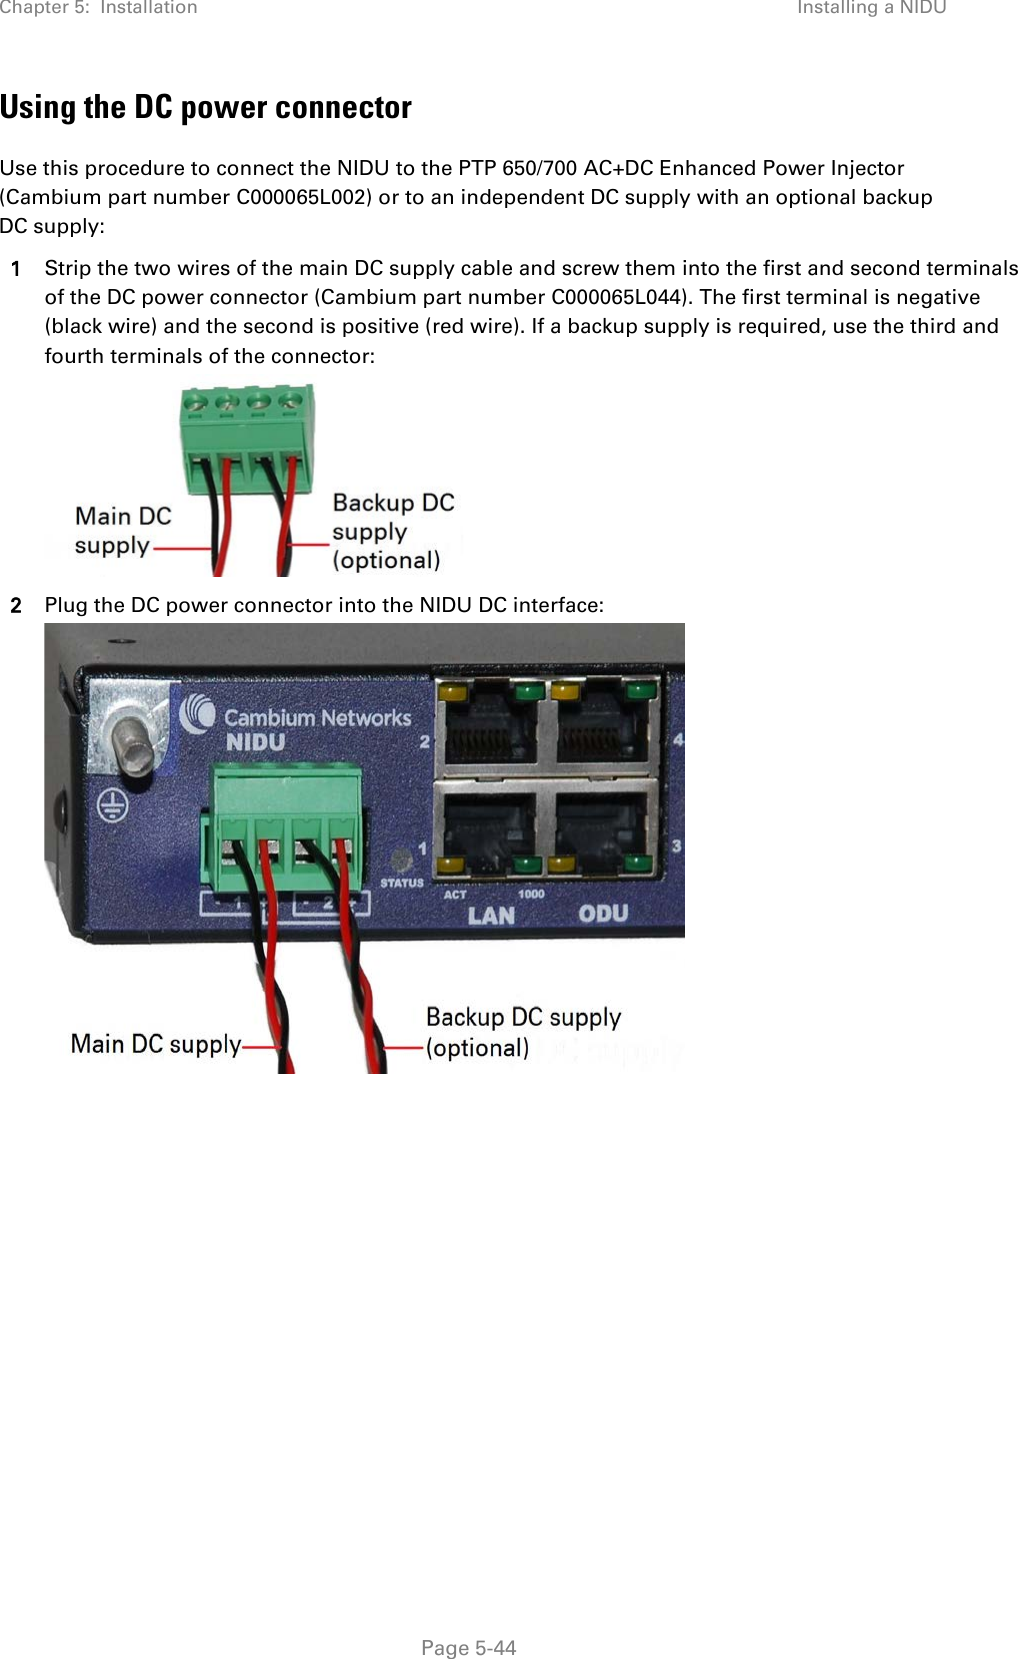 Chapter 5:  Installation Installing a NIDU  Using the DC power connector Use this procedure to connect the NIDU to the PTP 650/700 AC+DC Enhanced Power Injector (Cambium part number C000065L002) or to an independent DC supply with an optional backup DC supply: 1 Strip the two wires of the main DC supply cable and screw them into the first and second terminals of the DC power connector (Cambium part number C000065L044). The first terminal is negative (black wire) and the second is positive (red wire). If a backup supply is required, use the third and fourth terminals of the connector:  2 Plug the DC power connector into the NIDU DC interface:   Page 5-44 